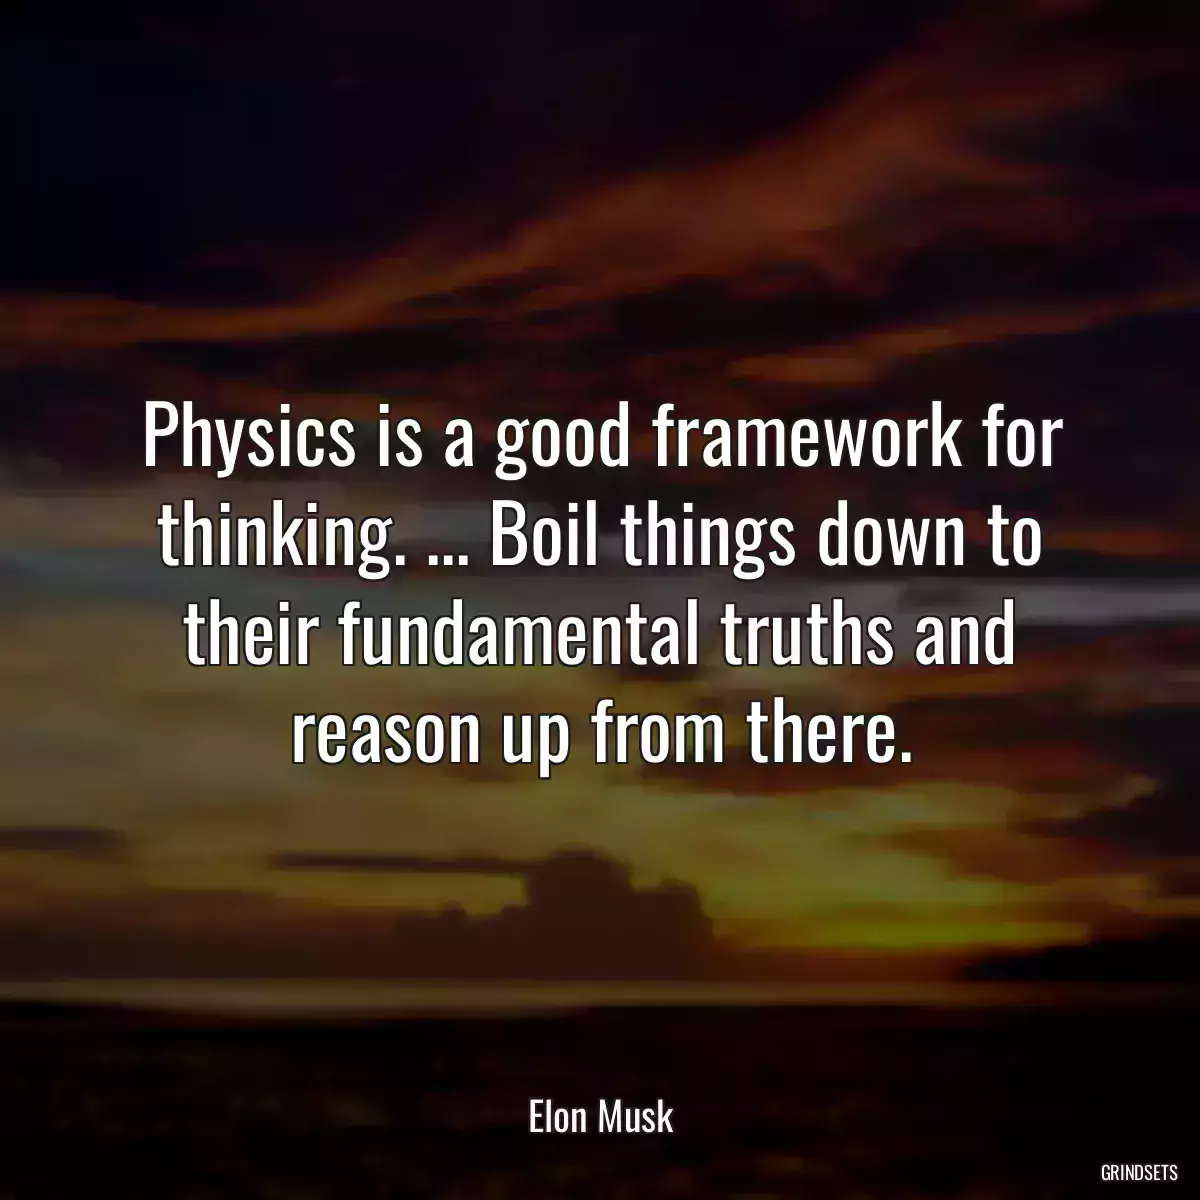 Physics is a good framework for thinking. ... Boil things down to their fundamental truths and reason up from there.